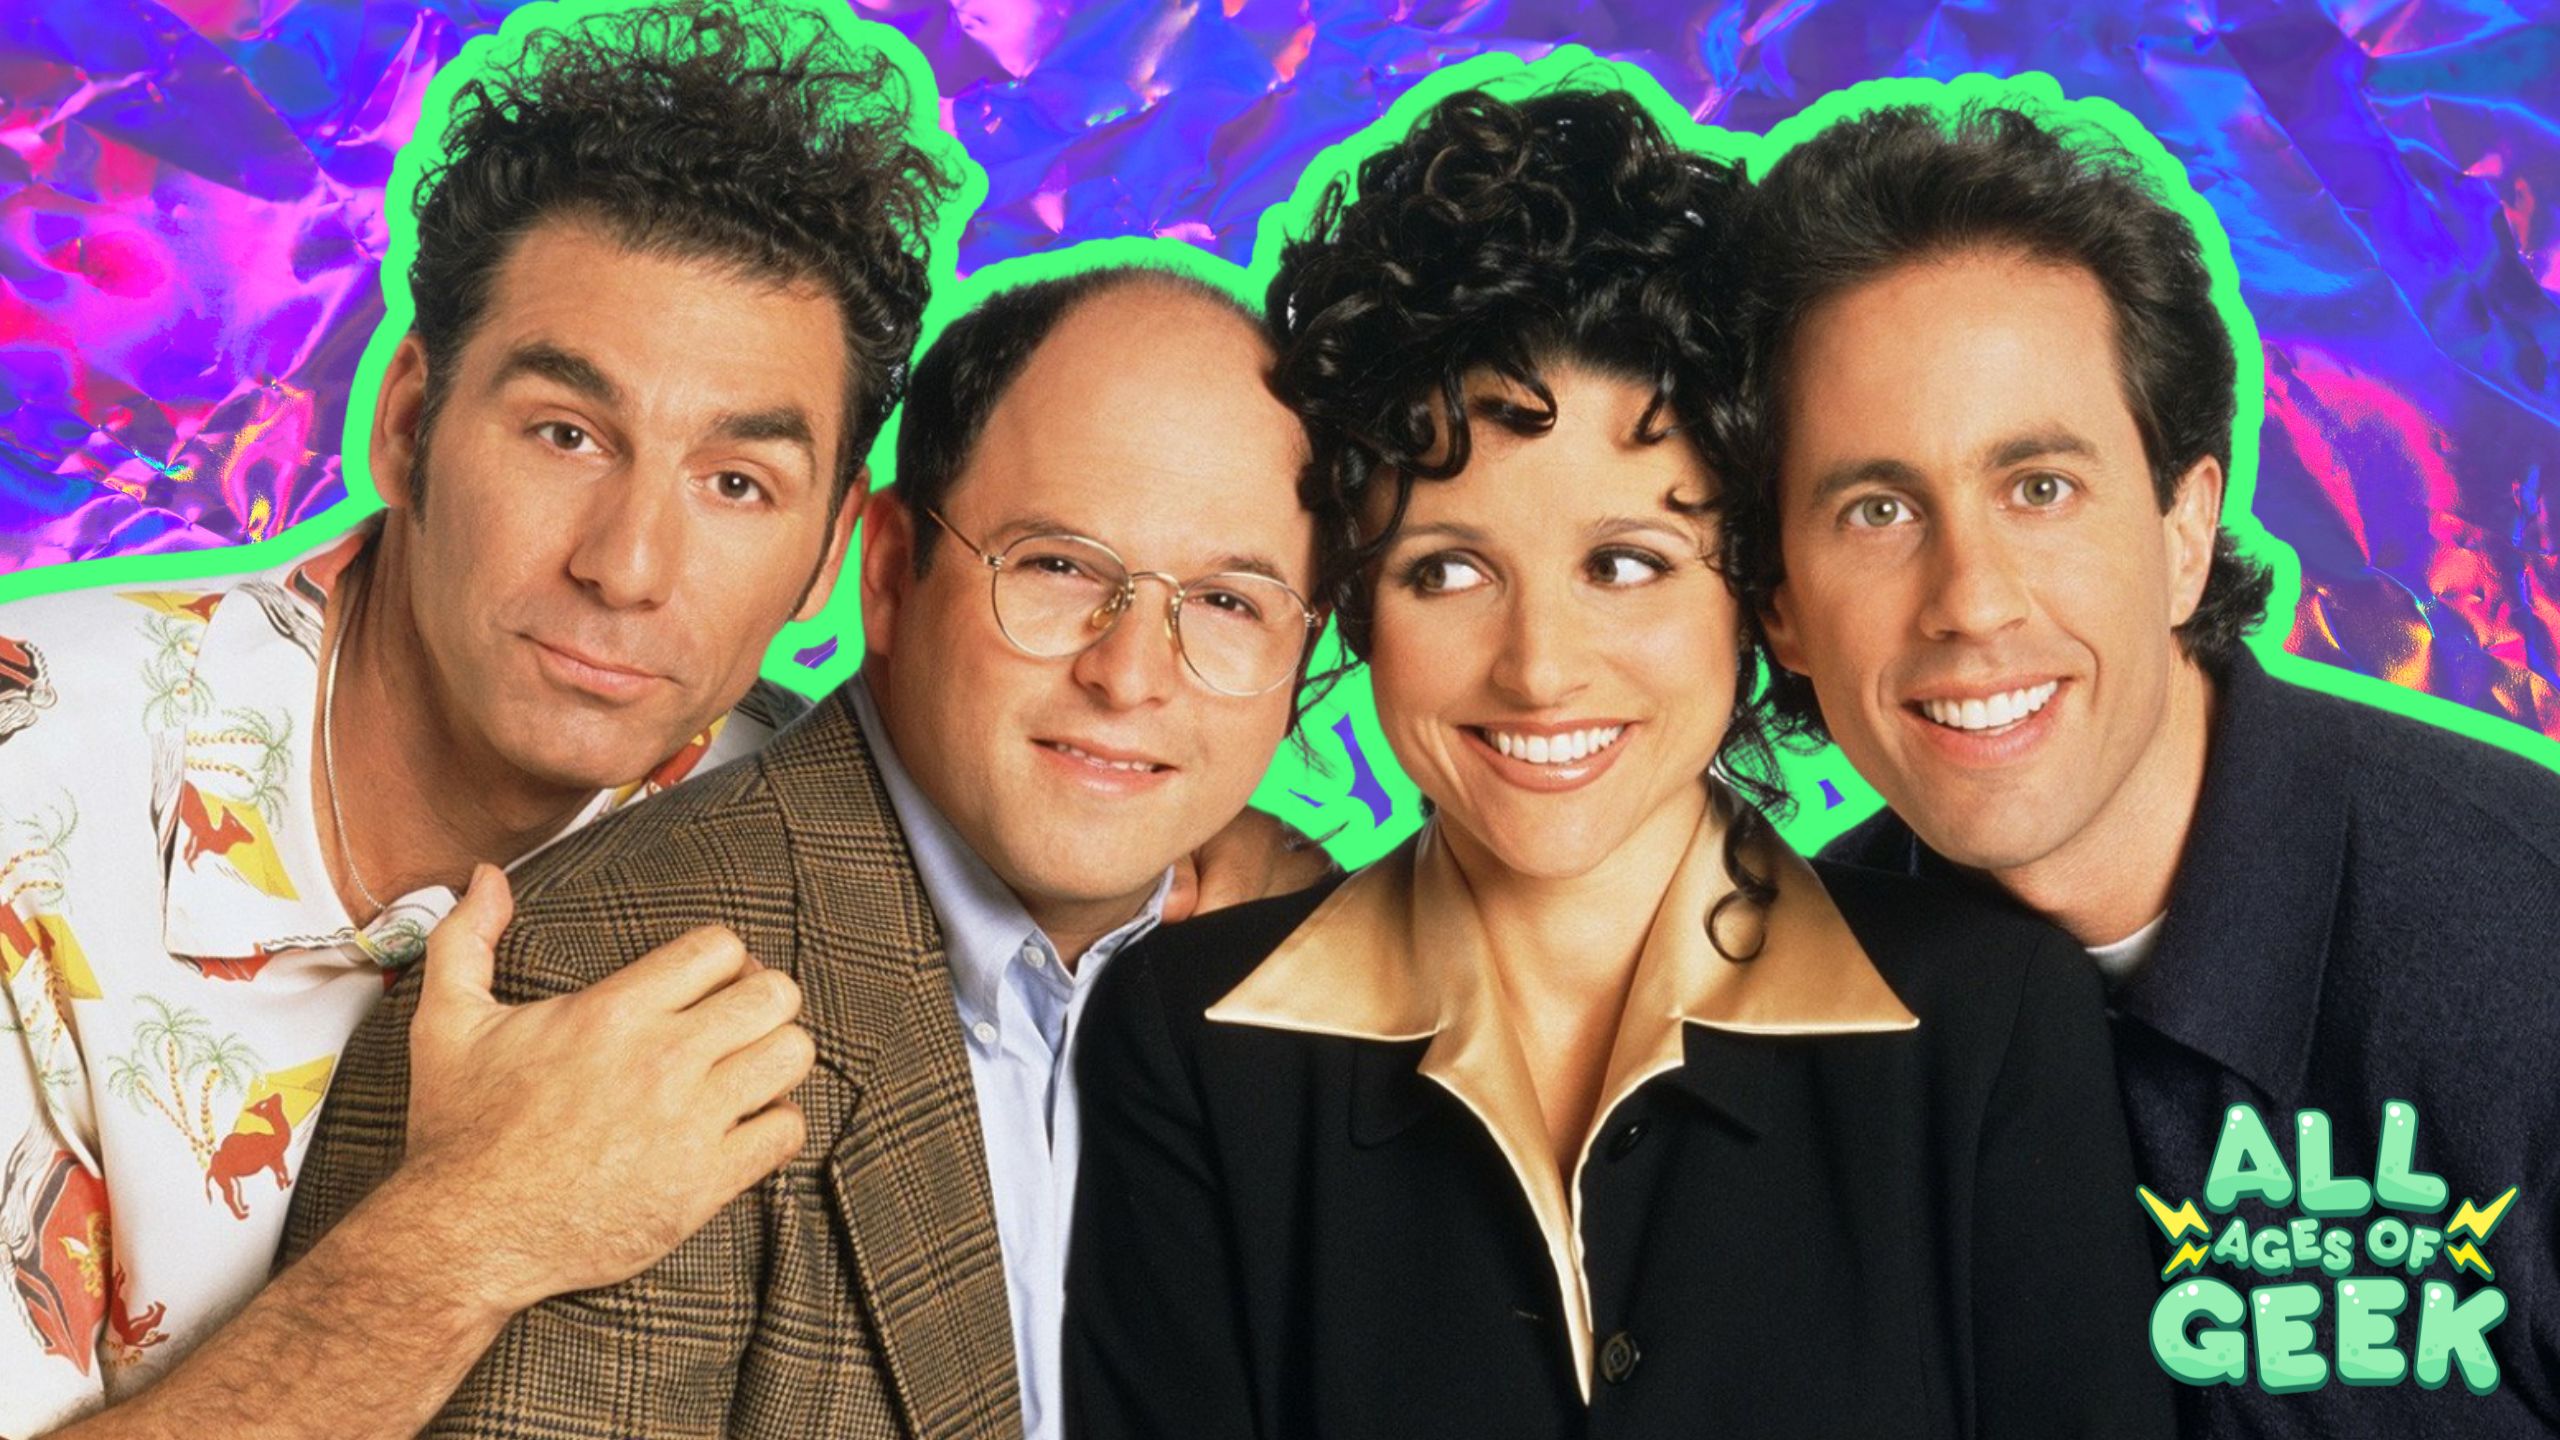 In the image, the main cast of the iconic 90s sitcom "Seinfeld" is shown together in a friendly and close pose. From left to right, the characters are Cosmo Kramer, George Costanza, Elaine Benes, and Jerry Seinfeld. Kramer is seen with his signature quirky expression, wearing a colorful Hawaiian shirt. George, dressed in a plaid blazer, looks more reserved but slightly amused. Elaine, with her curly hair and a big smile, exudes charm and confidence. Finally, Jerry, with his familiar bright smile, completes the group. The background features a vibrant, colorful abstract pattern with a neon green outline around each character, adding a fun and energetic vibe to the image. The logo "All Ages of Geek" is displayed in the bottom right corner.